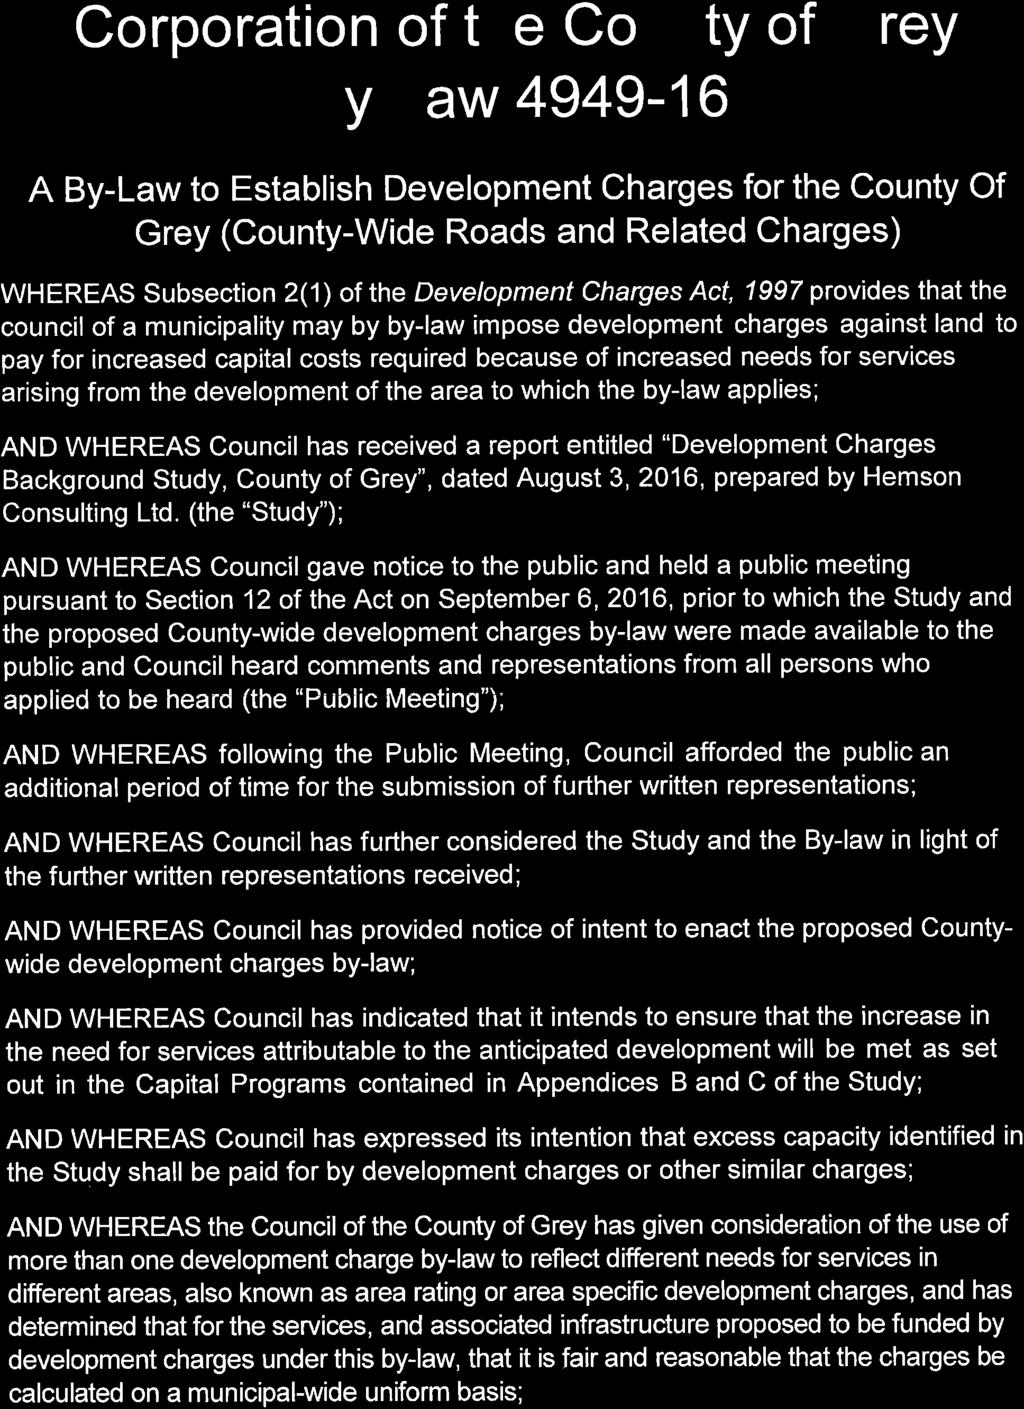 Corporation of the County of Grey By-Law 4949-16 A By-Law to Establish Development Charges for the County Of Grey (County-Wide Roads and Related Charges) WHEREAS Subsection 2(1) of the Development